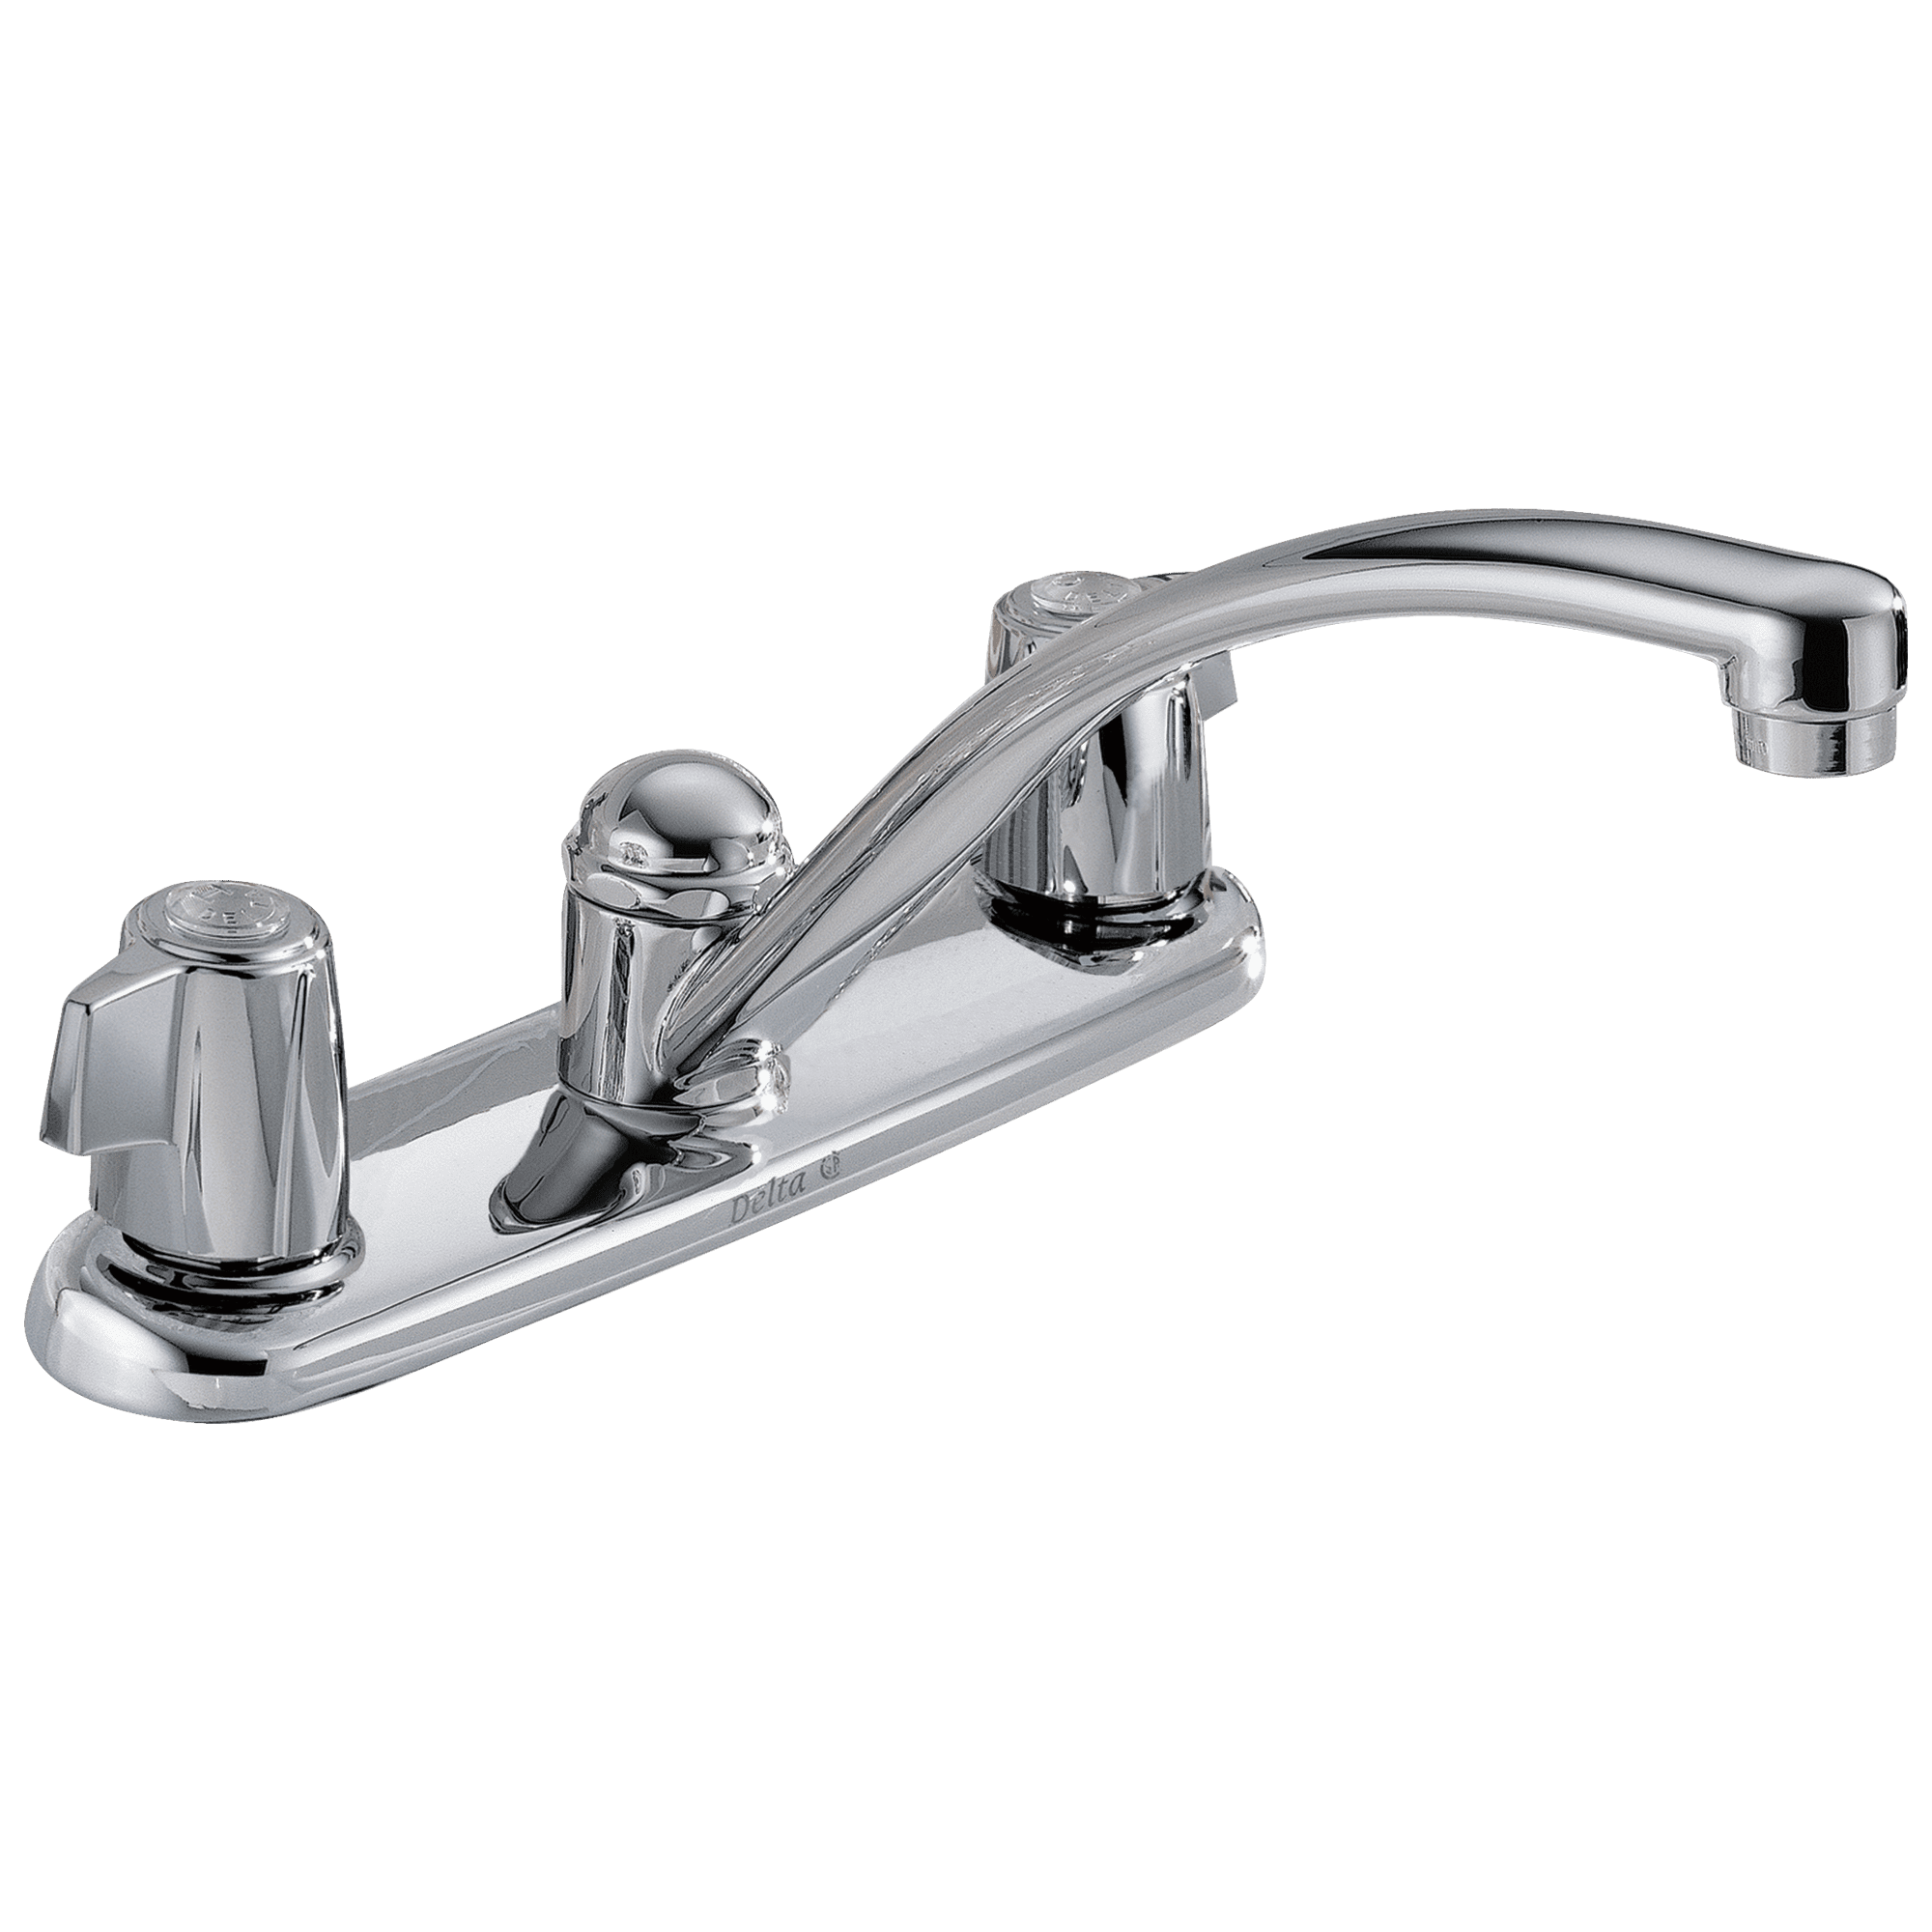 Pfister Pfirst Series 2-Handle Kitchen Faucet in Polished Chrome 